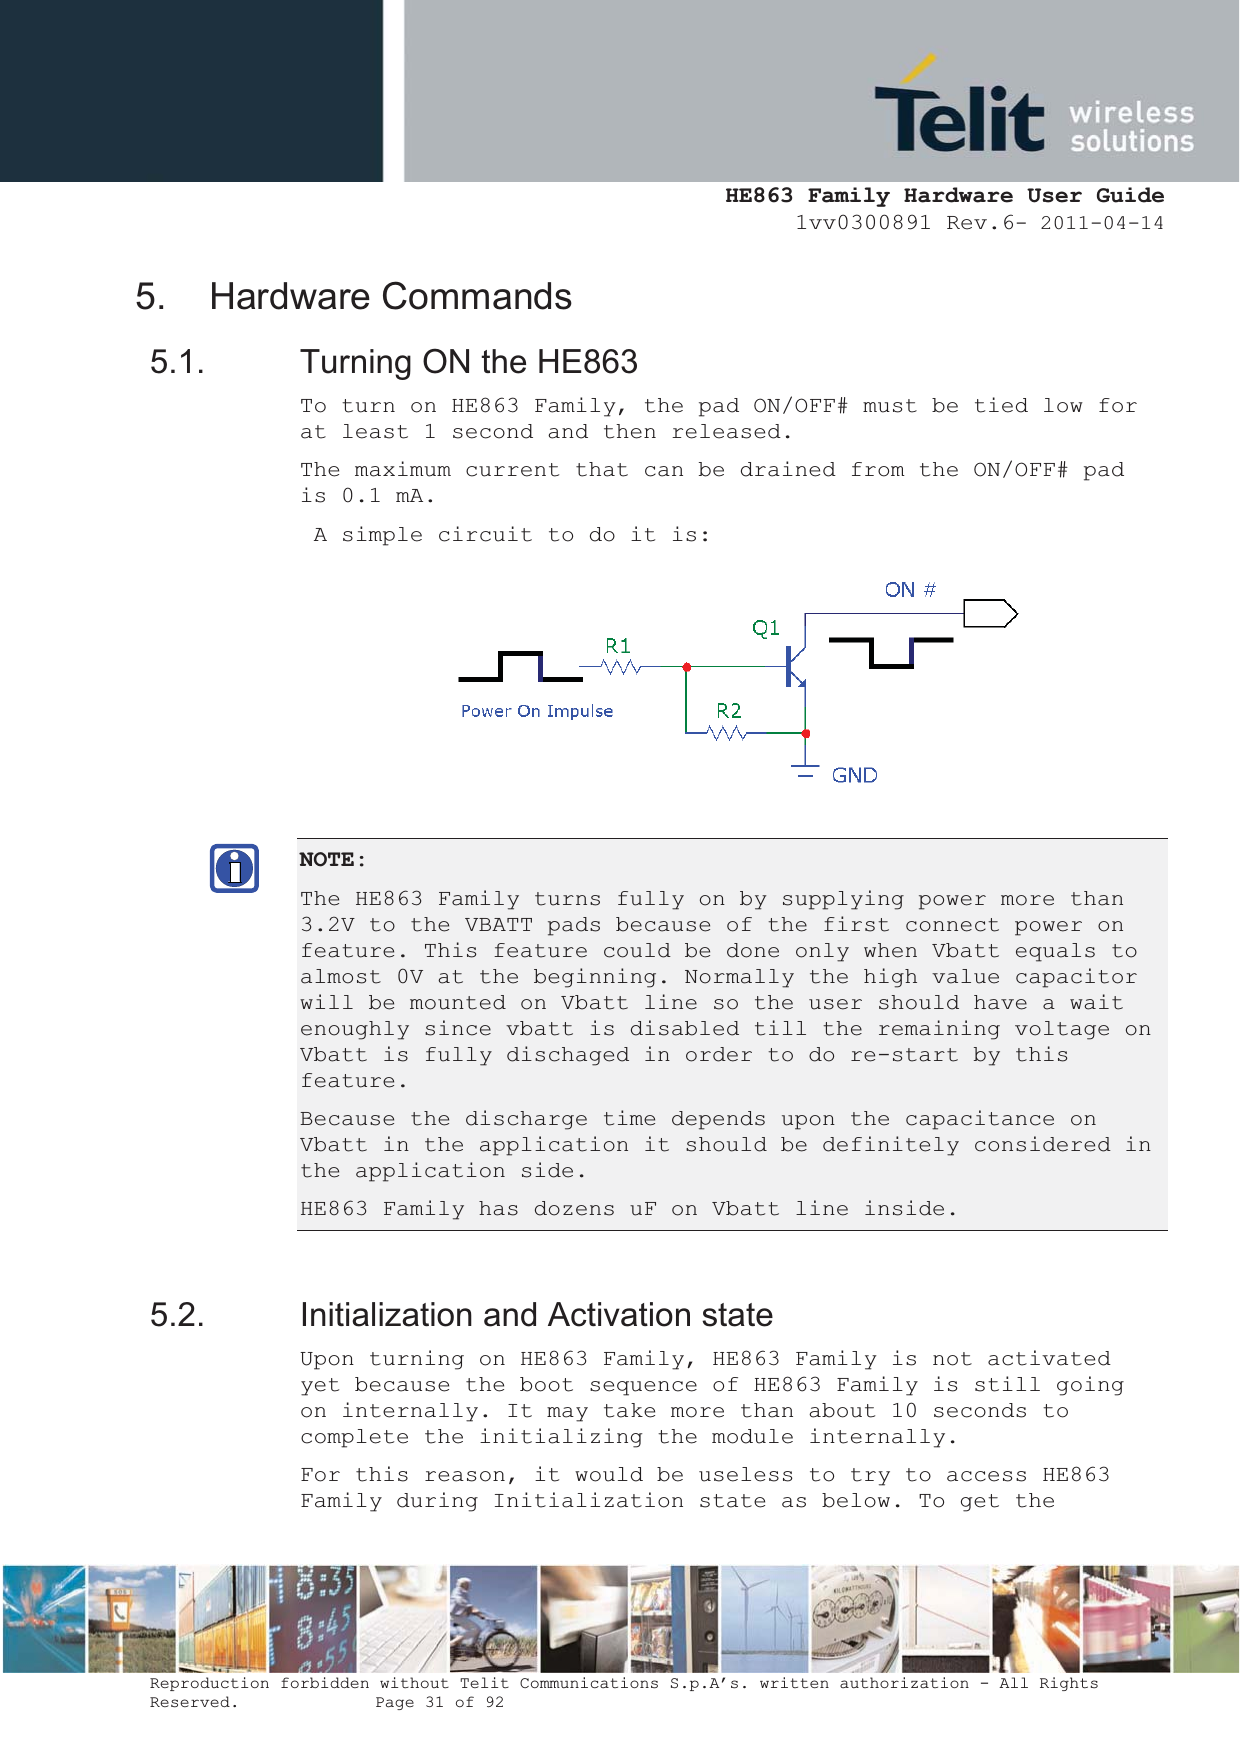  HE863 Family Hardware User Guide 1vv0300891 Rev.6- 2011-04-14    Reproduction forbidden without Telit Communications S.p.A’s. written authorization - All Rights Reserved.    Page 31 of 92  5. Hardware Commands 5.1.  Turning ON the HE863 To turn on HE863 Family, the pad ON/OFF# must be tied low for at least 1 second and then released. The maximum current that can be drained from the ON/OFF# pad is 0.1 mA.  A simple circuit to do it is:  NOTE:The HE863 Family turns fully on by supplying power more than 3.2V to the VBATT pads because of the first connect power on feature. This feature could be done only when Vbatt equals to almost 0V at the beginning. Normally the high value capacitor will be mounted on Vbatt line so the user should have a wait enoughly since vbatt is disabled till the remaining voltage on Vbatt is fully dischaged in order to do re-start by this feature. Because the discharge time depends upon the capacitance on Vbatt in the application it should be definitely considered in the application side. HE863 Family has dozens uF on Vbatt line inside. 5.2.  Initialization and Activation state Upon turning on HE863 Family, HE863 Family is not activated yet because the boot sequence of HE863 Family is still going on internally. It may take more than about 10 seconds to complete the initializing the module internally. For this reason, it would be useless to try to access HE863 Family during Initialization state as below. To get the 